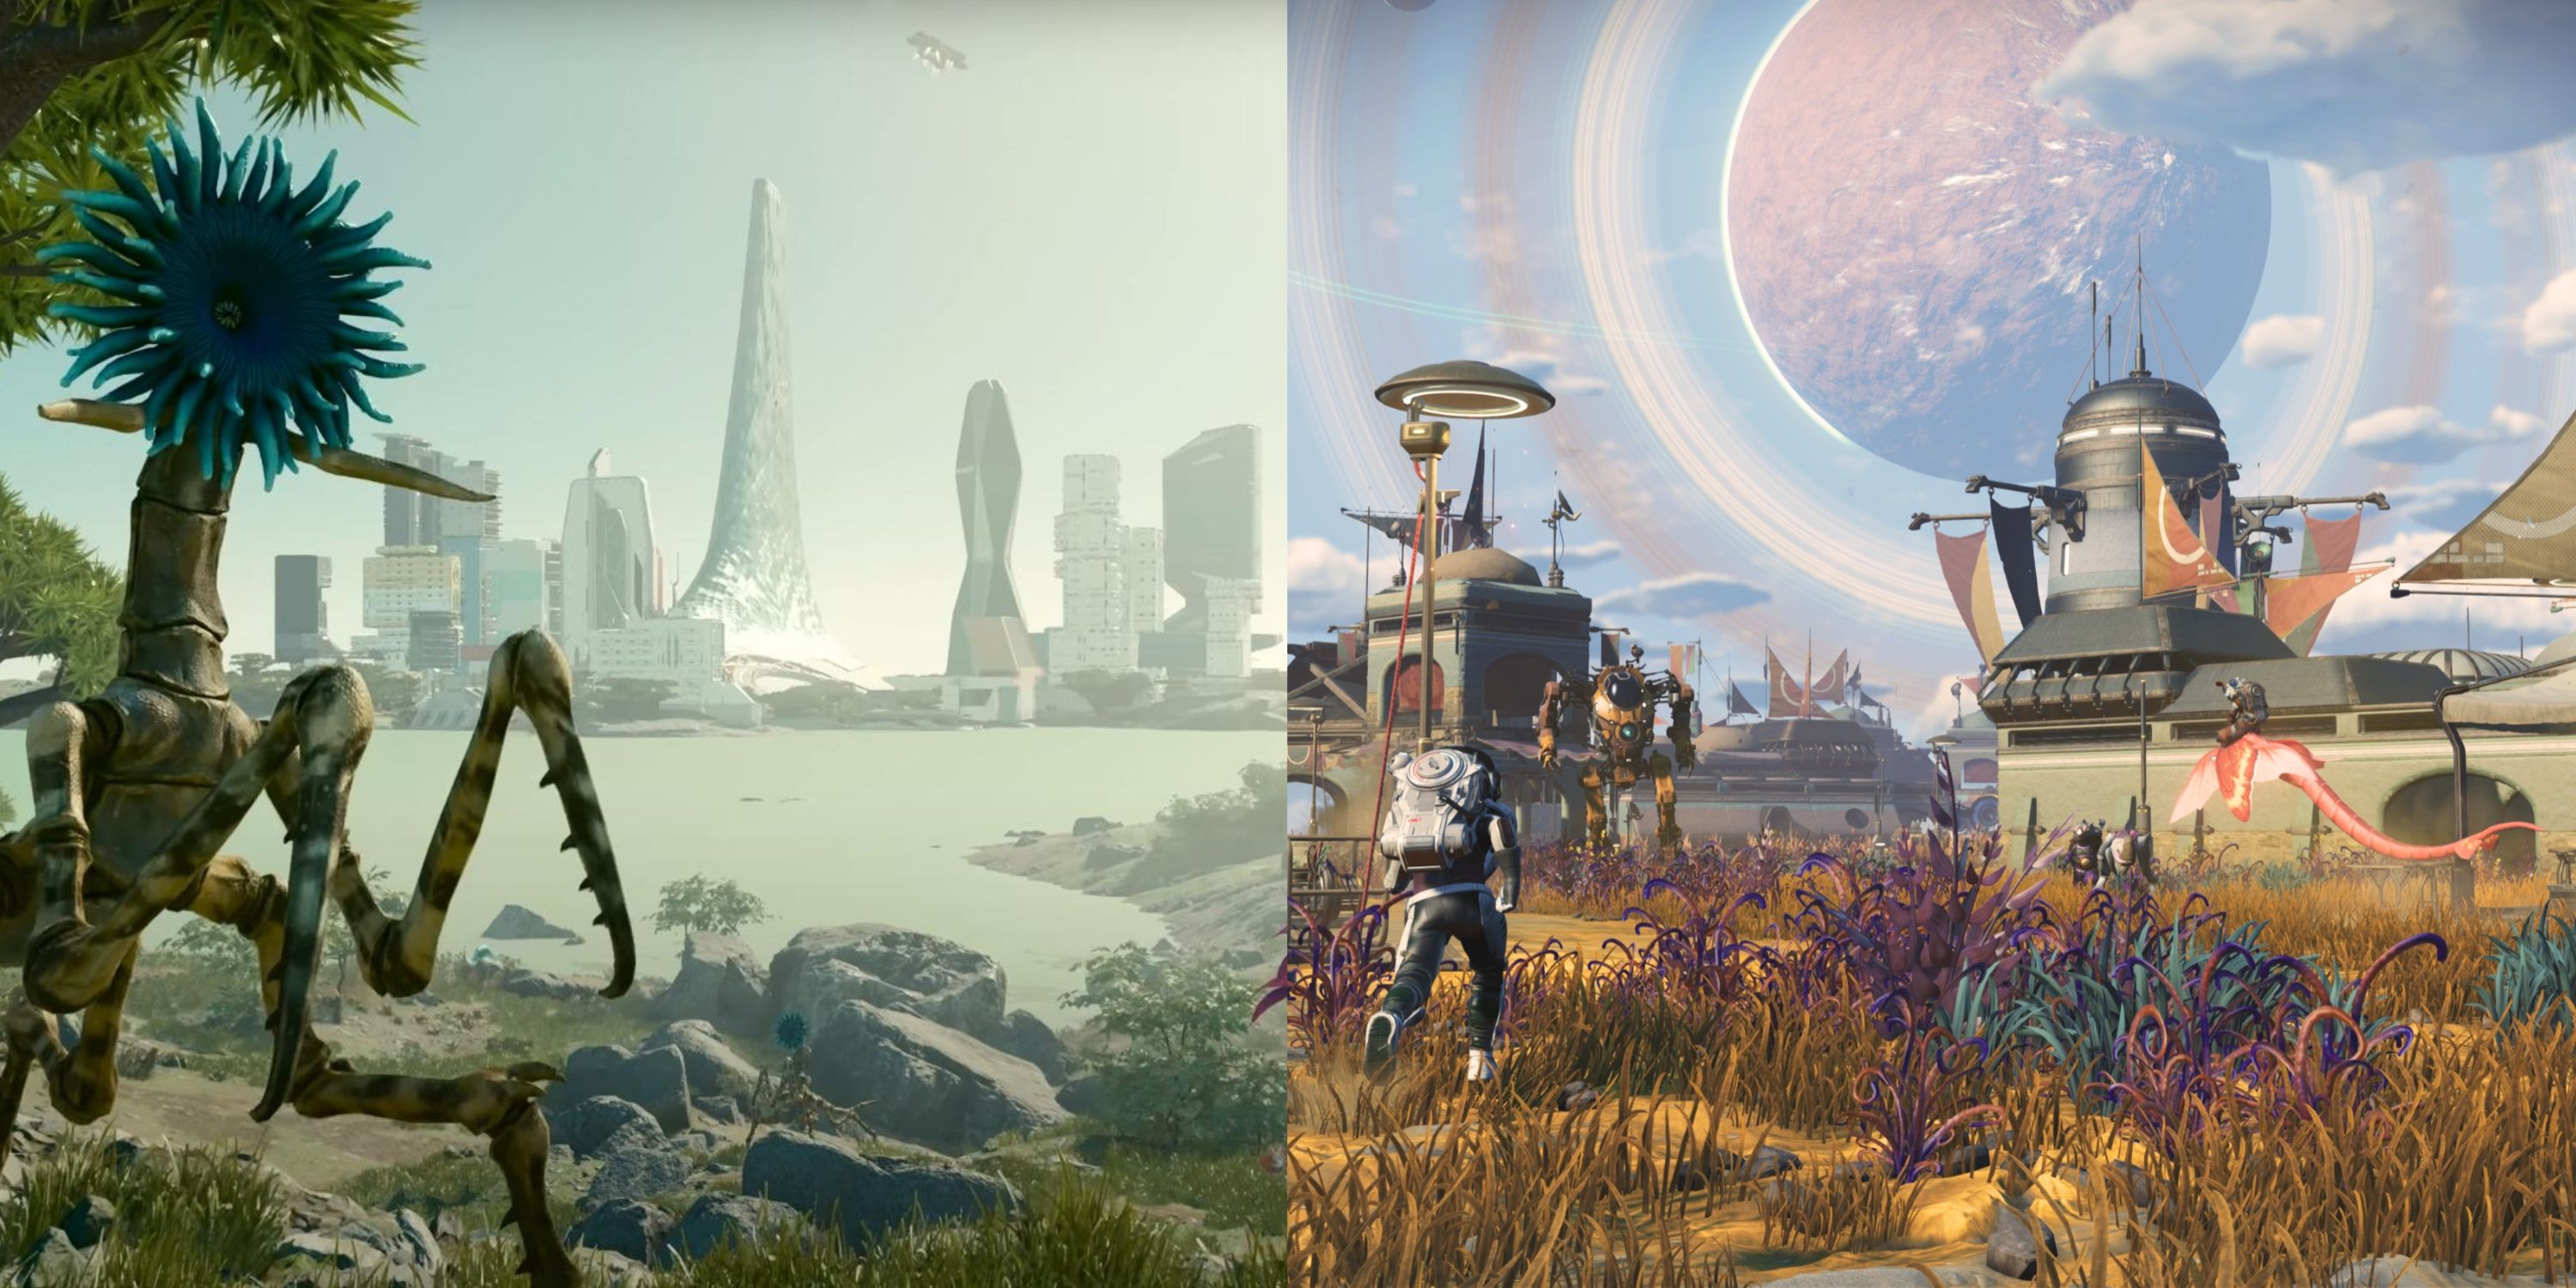 Starfield Vs No Man's Sky: Which Game Is Better?